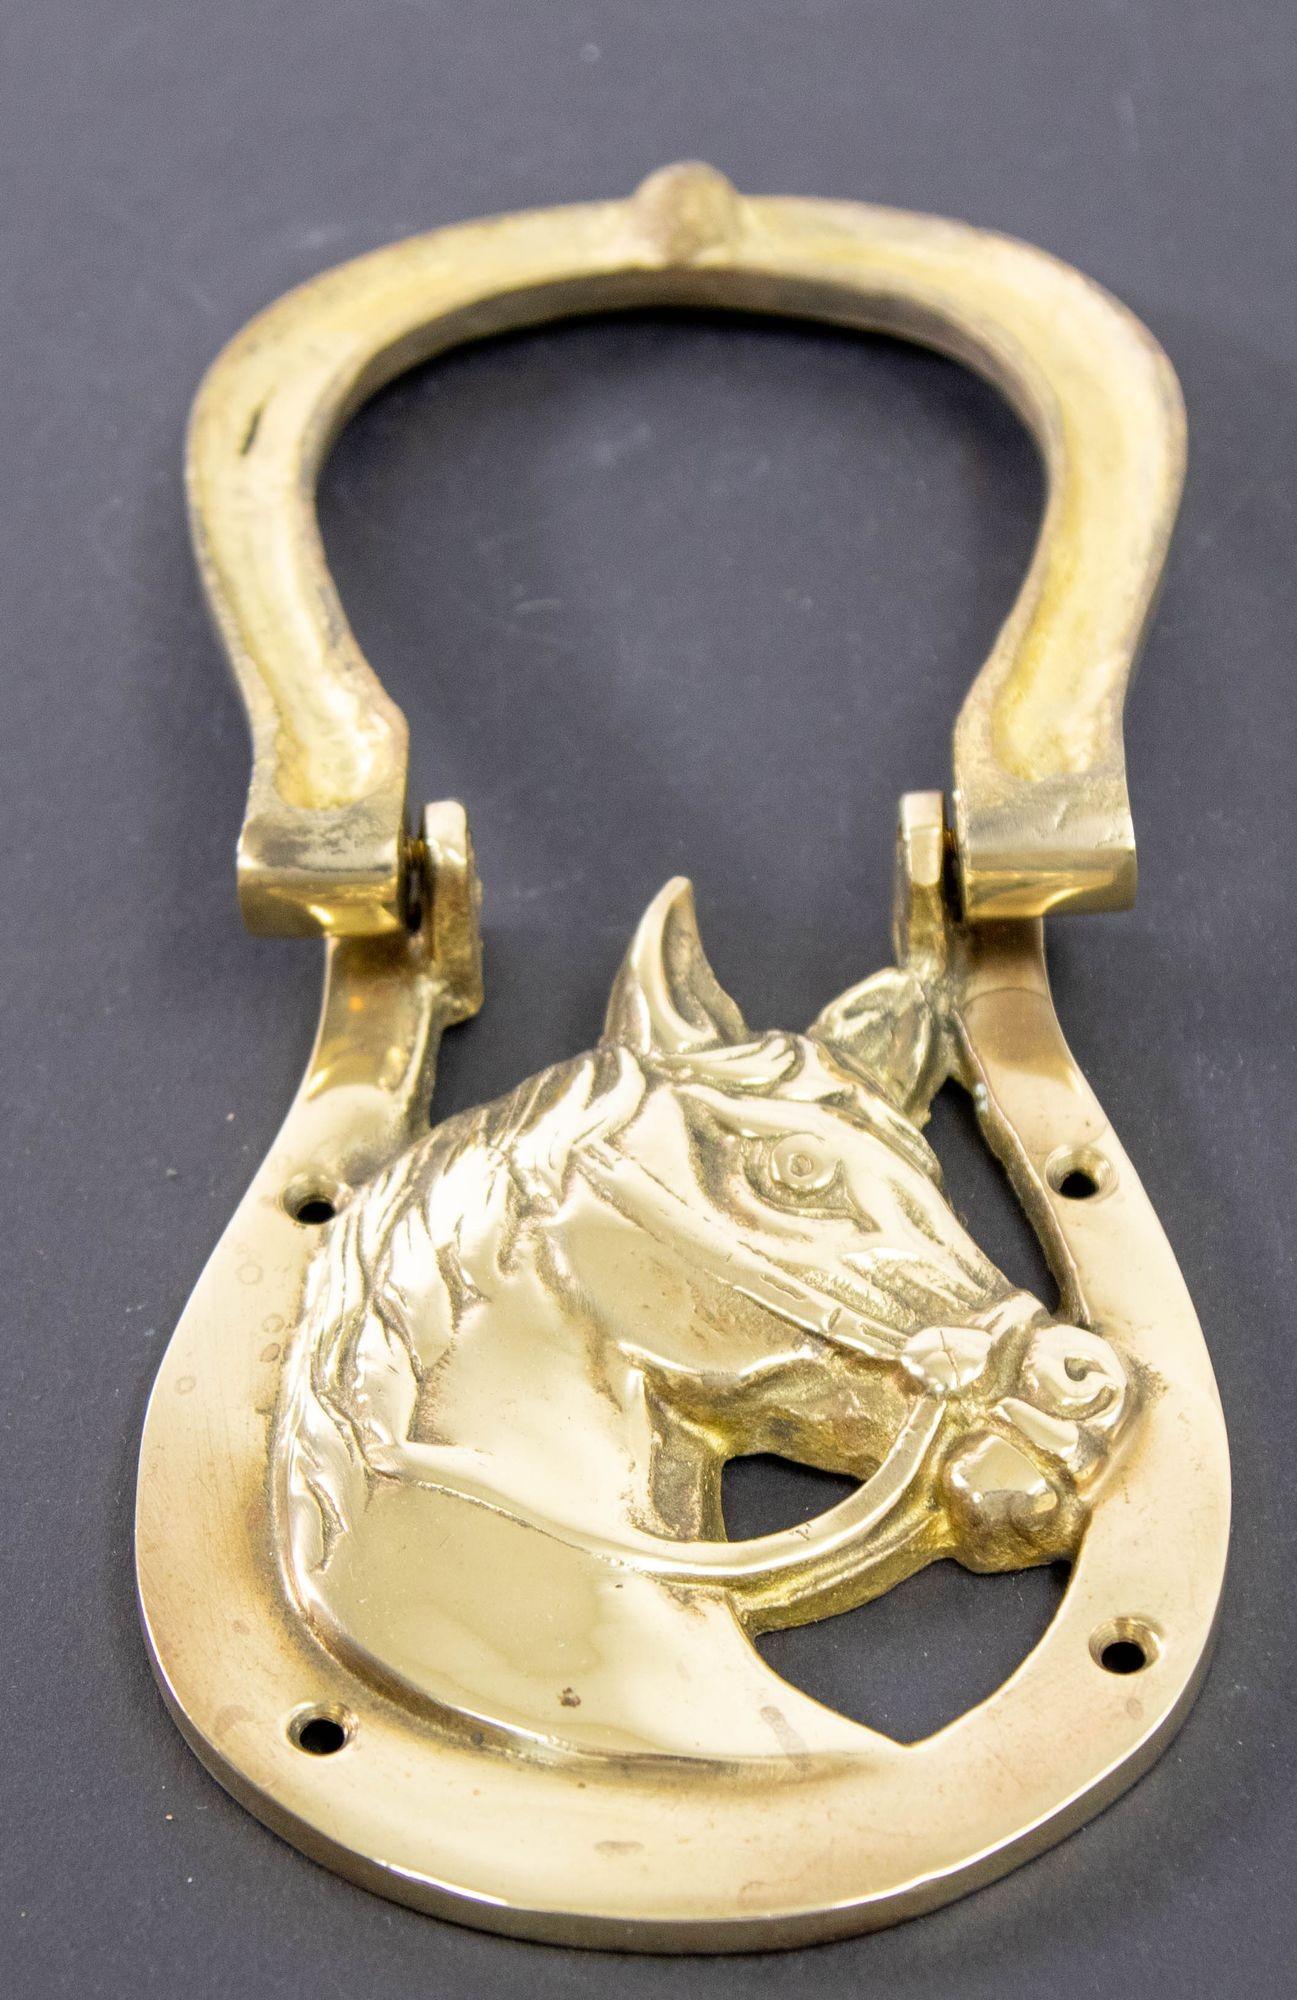 Vintage English Brass Horse Head and Shoe Door Knocker.
1950s English Equestrian brass door knocker depicting a horse head in bridle in a large horseshoe.
A horseshoe door knocker made of cast brass with a bridled horse bust in profile framed inside